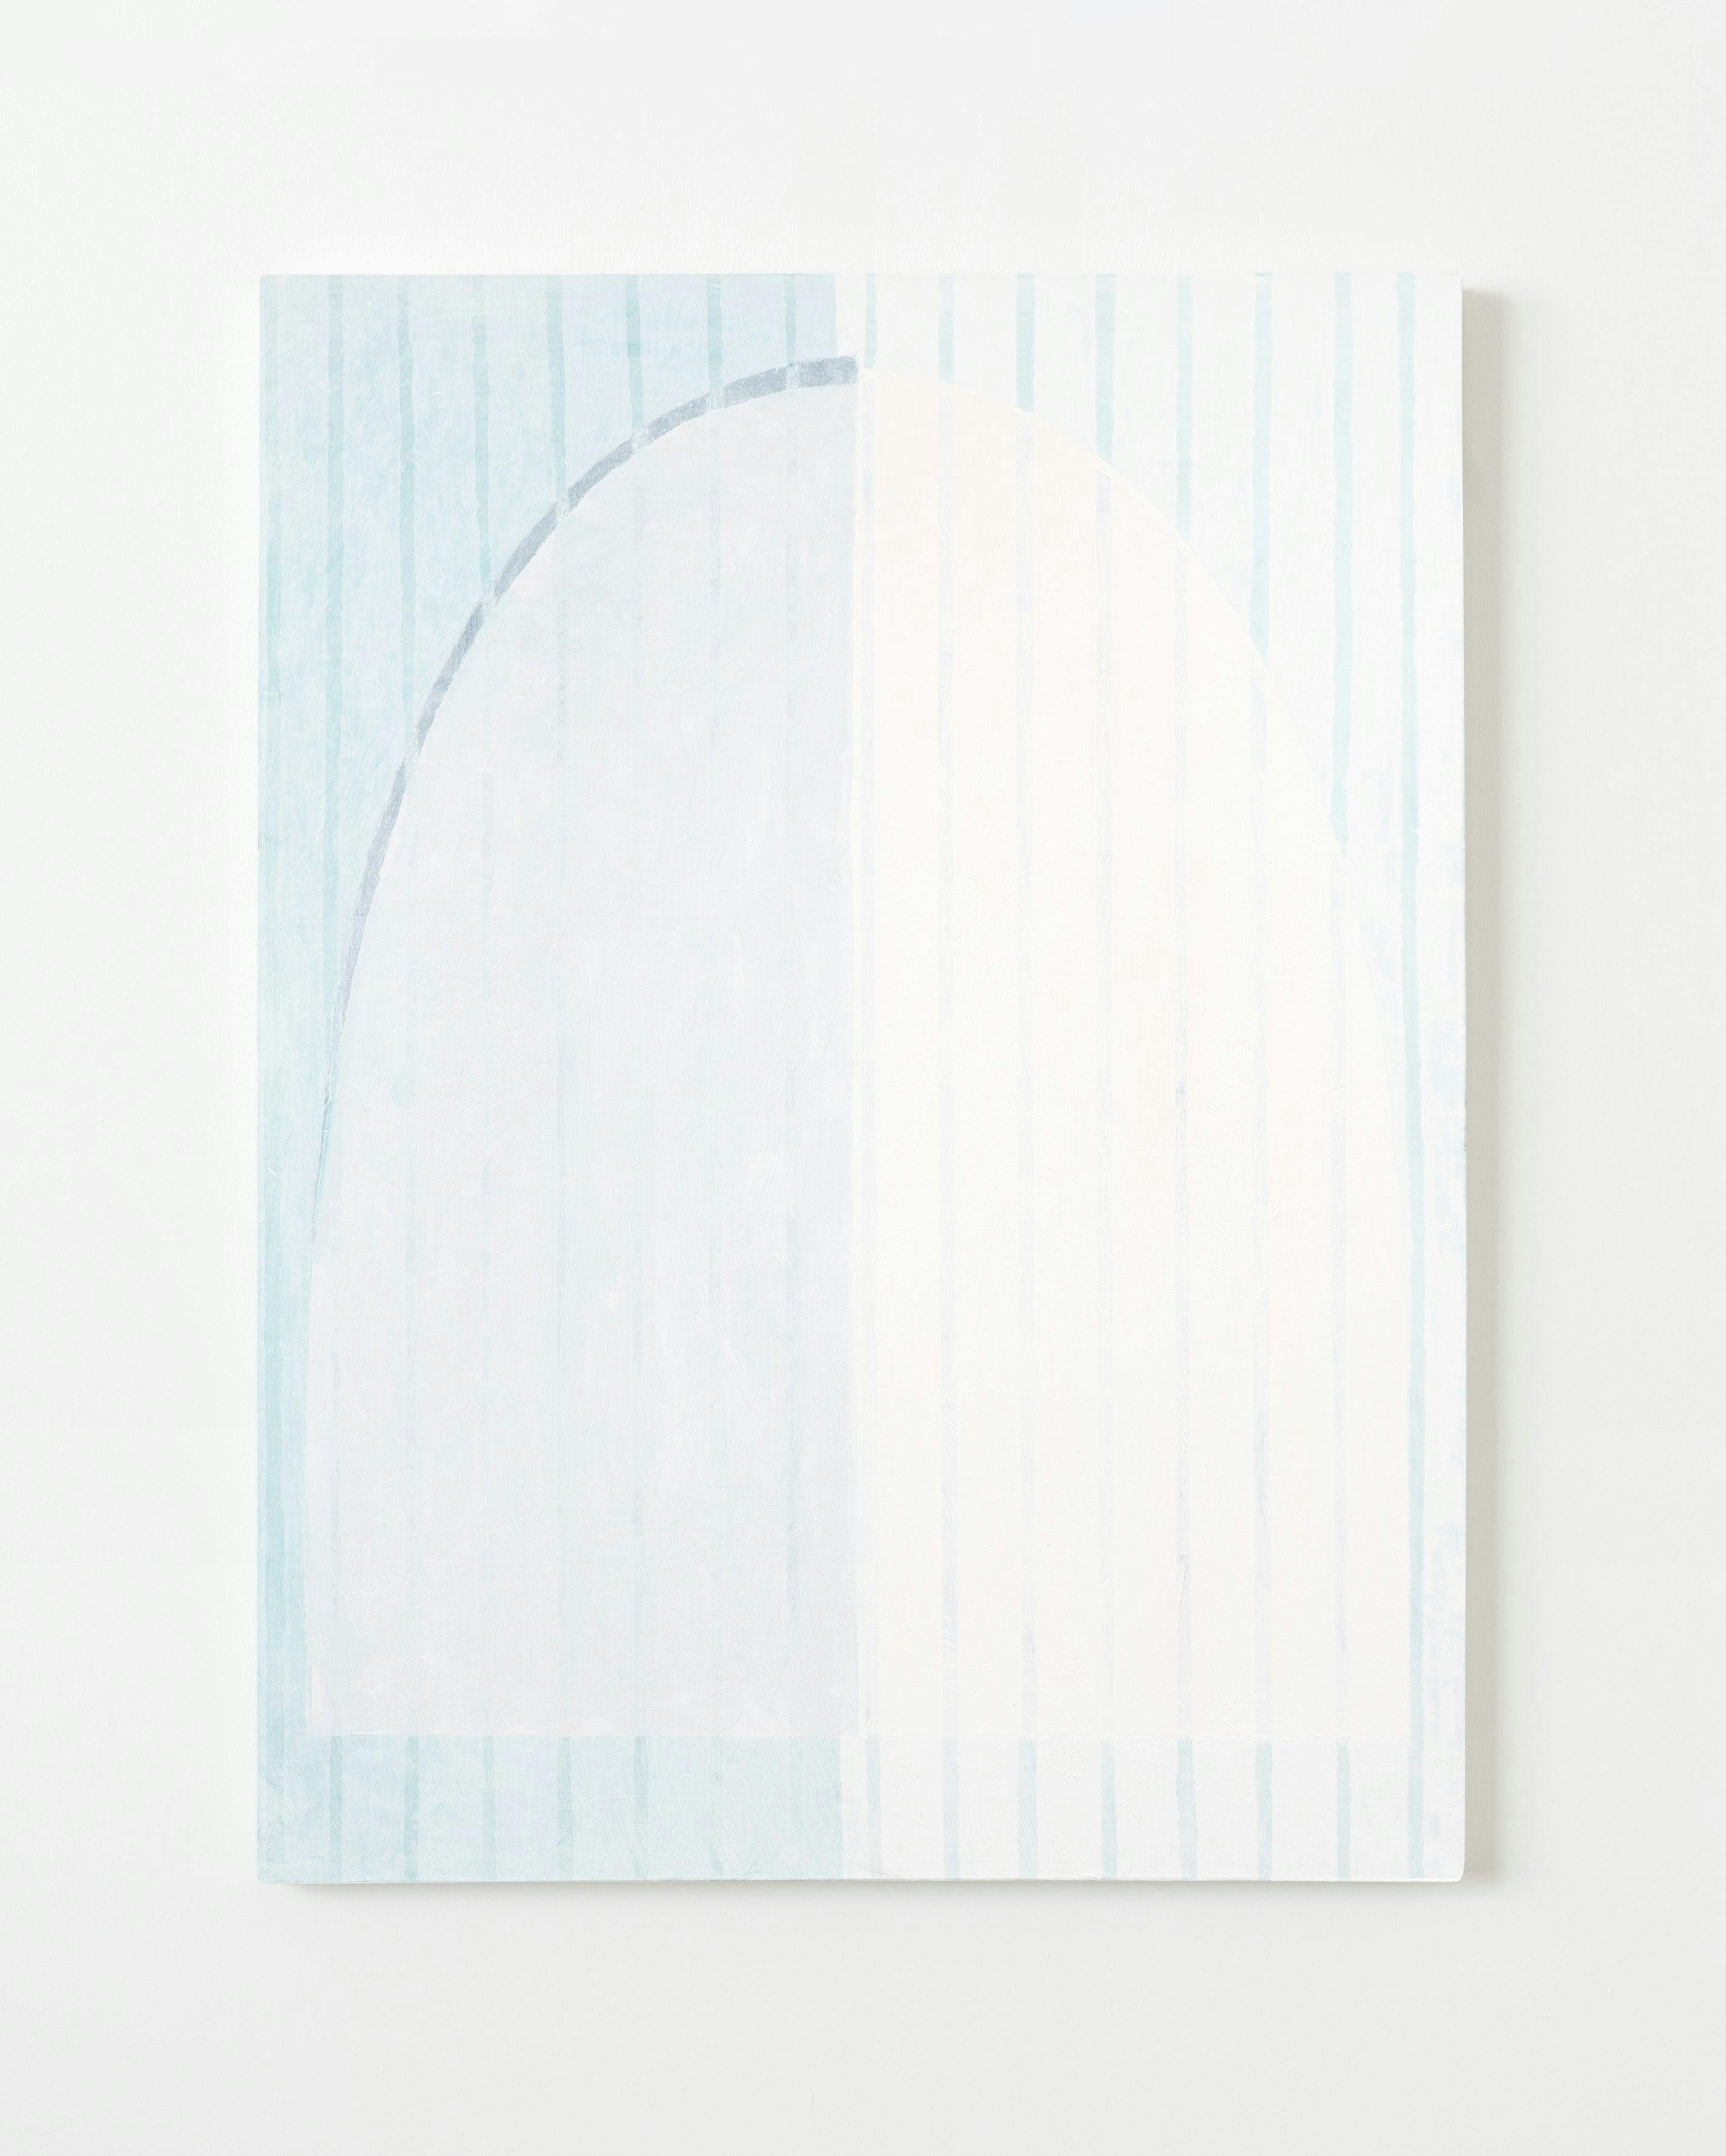 Painting by Aschely Vaughan Cone titled "Double White, Striped Arch Doublet".